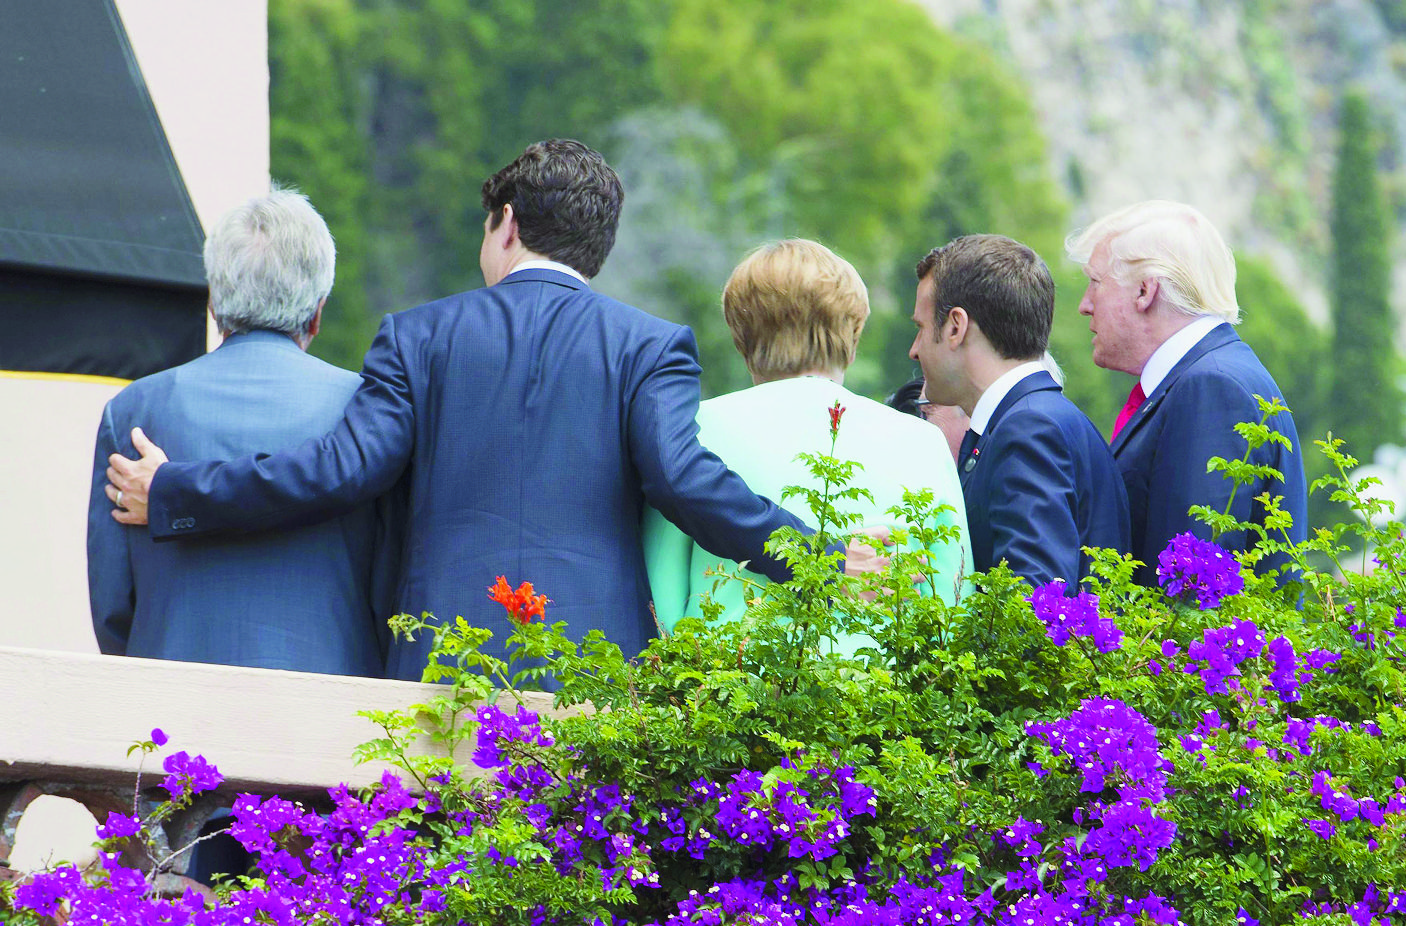 epa05992882 A handout photo made available by the Chigi Palace Press office on 27 May 2017 shows part of the G7 leaders with (L-R) Italian Prime Minister Paolo Gentiloni, Canadian Prime Minister Justin Trudeau, German Chancellor Angela Markel, French President Emmanuel Macron and US President Donald J. Trump  posing for a group photo during the G7 Summit extended session in the Sicilian town of Taormina, Italy, on its second day on 27 May 2017. The second day is scheduled to deal with Innovation and Development in Africa, Global Issues such as Human Mobility, Food Security and Gender Equality as well as the G7 Global Relations,  the Italian G7 Presidency said in a media release.  EPA/TIBERIO BARCHIELLI/CHIGI PRESS OFFICE HANDOUT  HANDOUT EDITORIAL USE ONLY/NO SALES ITALY G7 SUMMIT